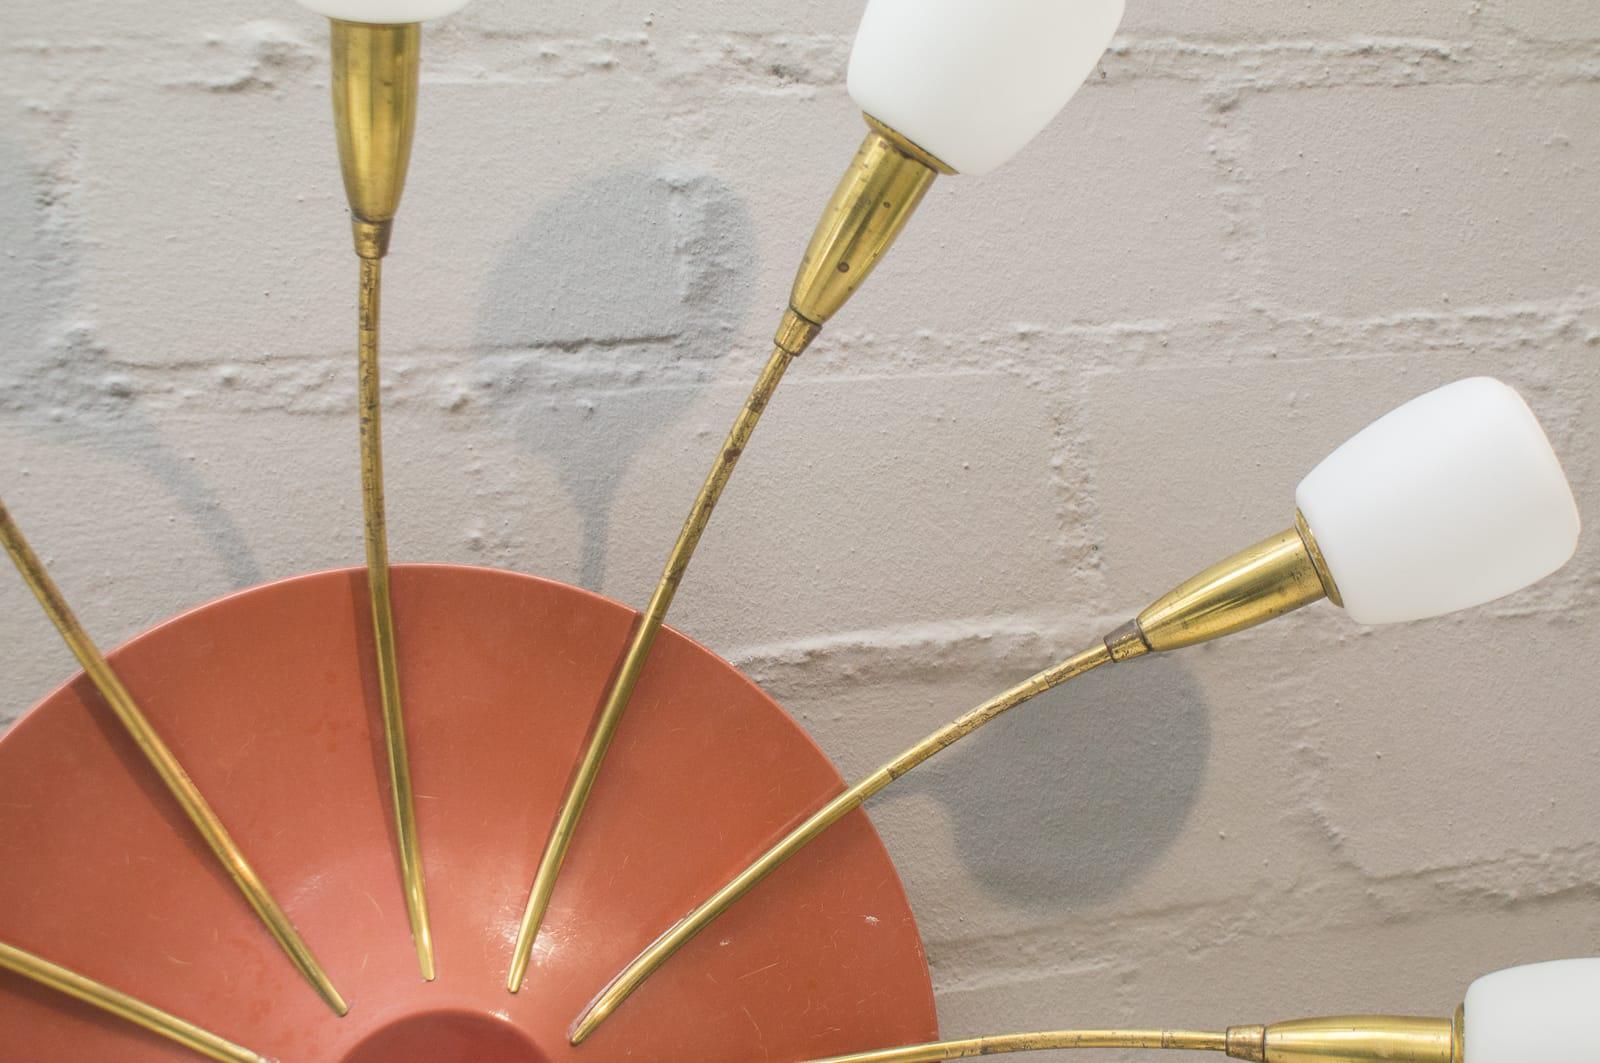 Large Midcentury Wall or Ceiling Sputnik Lamp with 12 Arms, 1950s For Sale 5